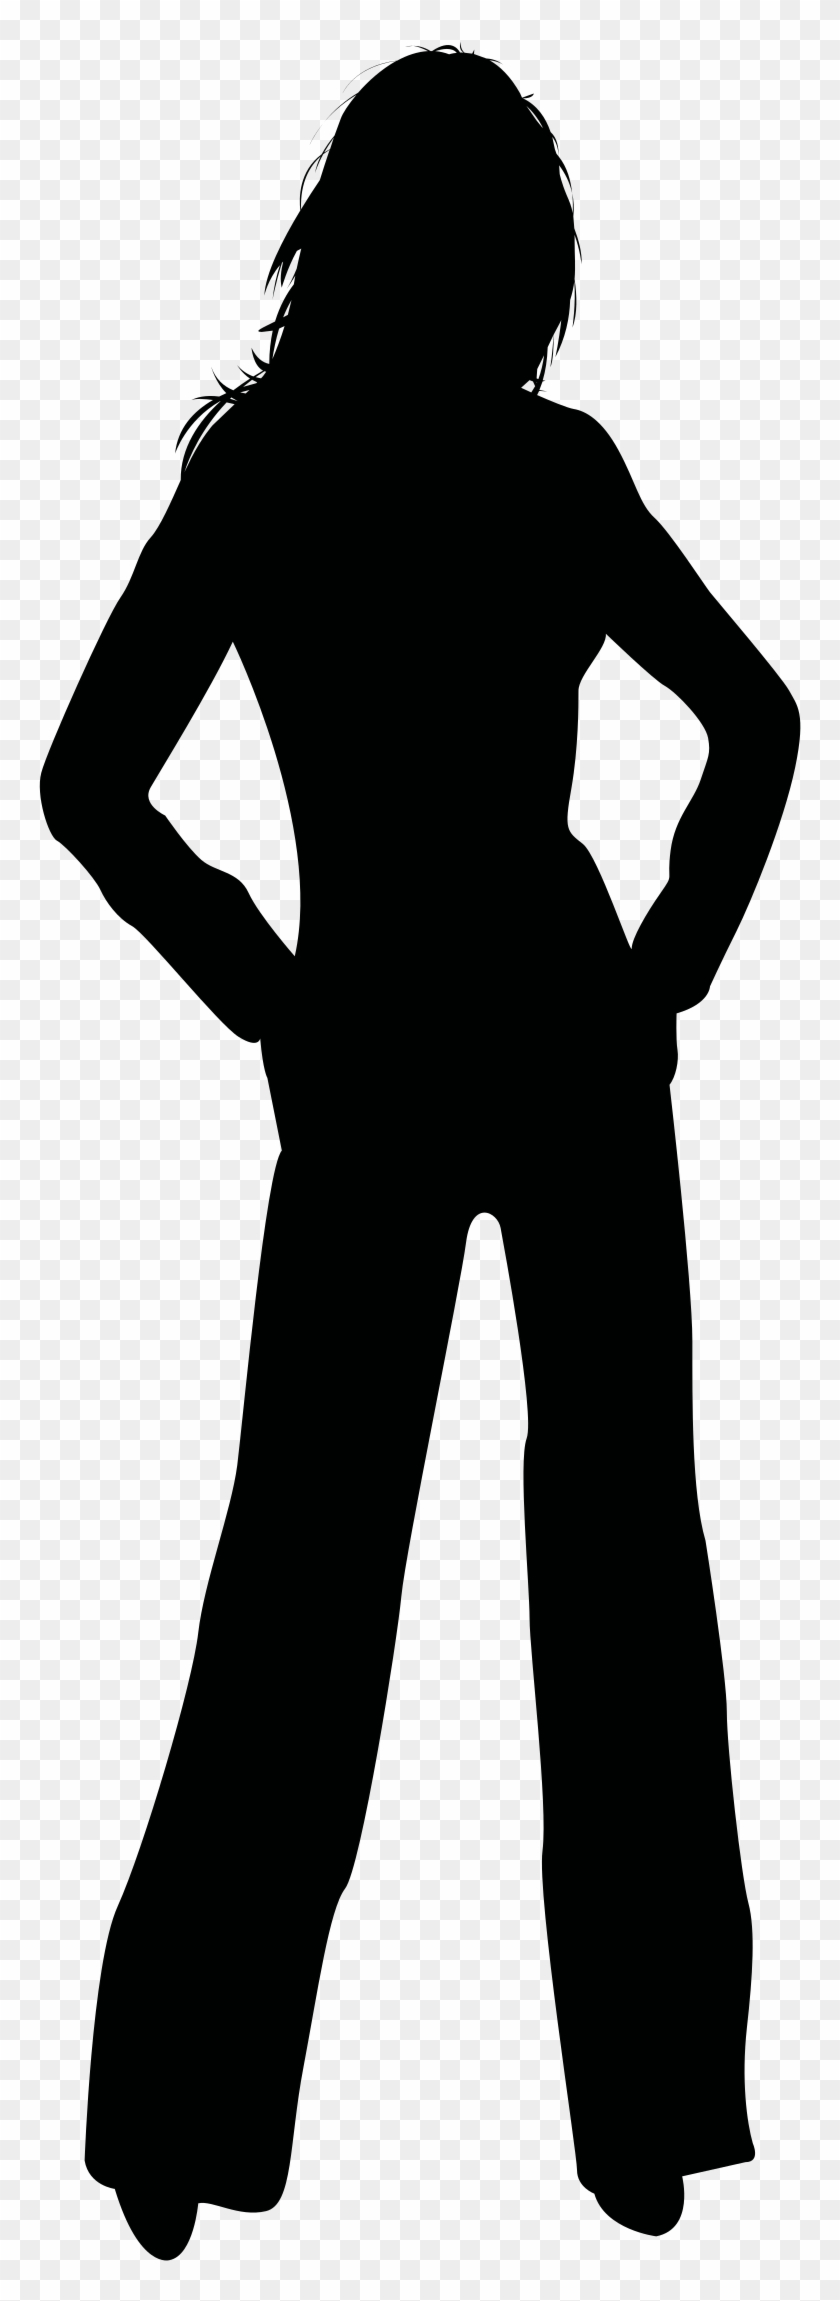 Transparent Girls Shadow - Clipart Girl Silhouette #1462477